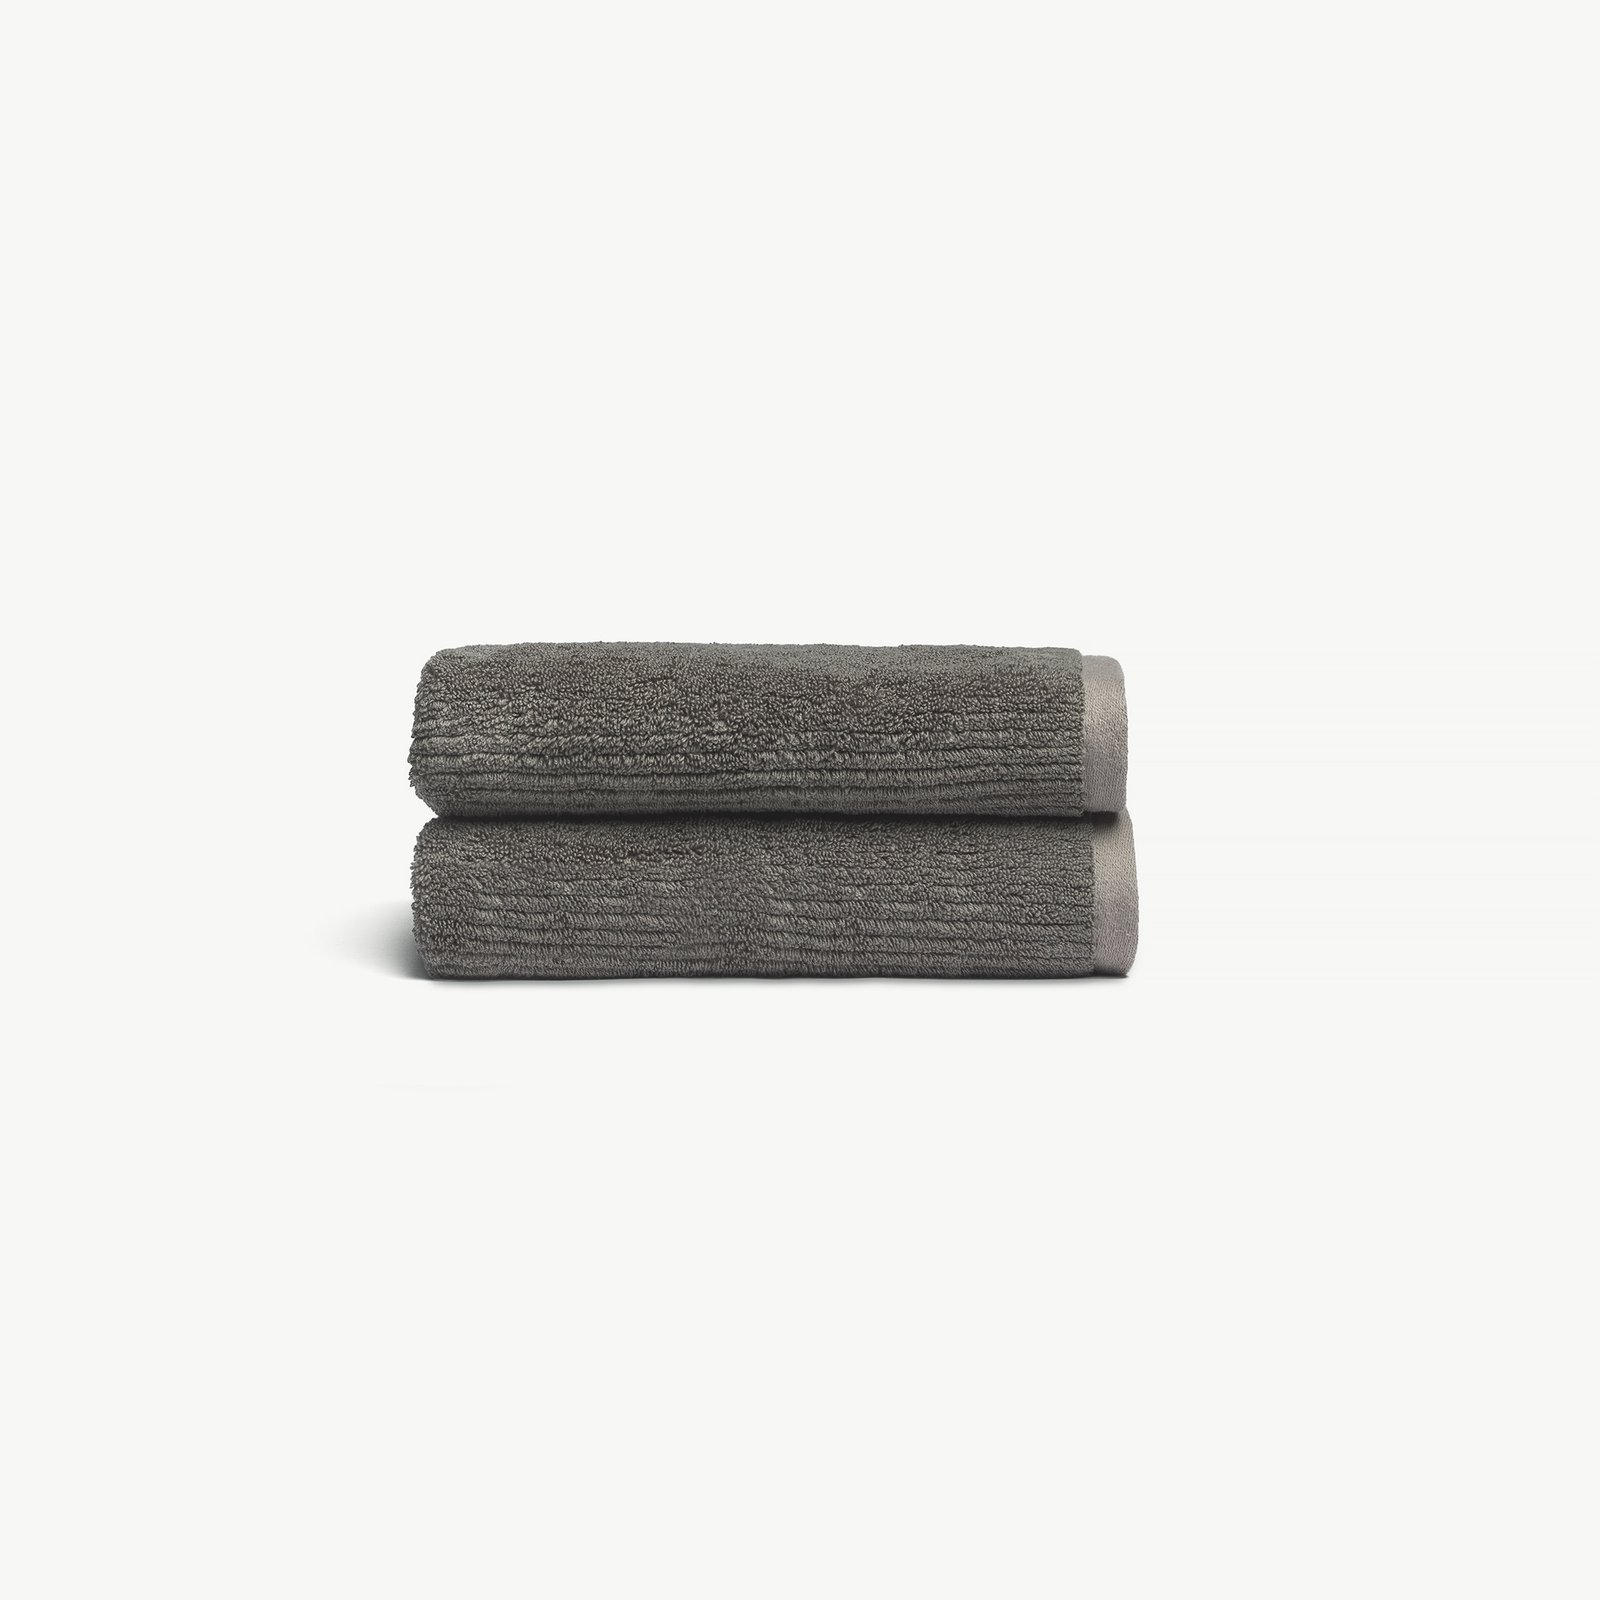 Ribbed Terry Hand Towels in the color Charcoal. Photo of product taken with a white background. 